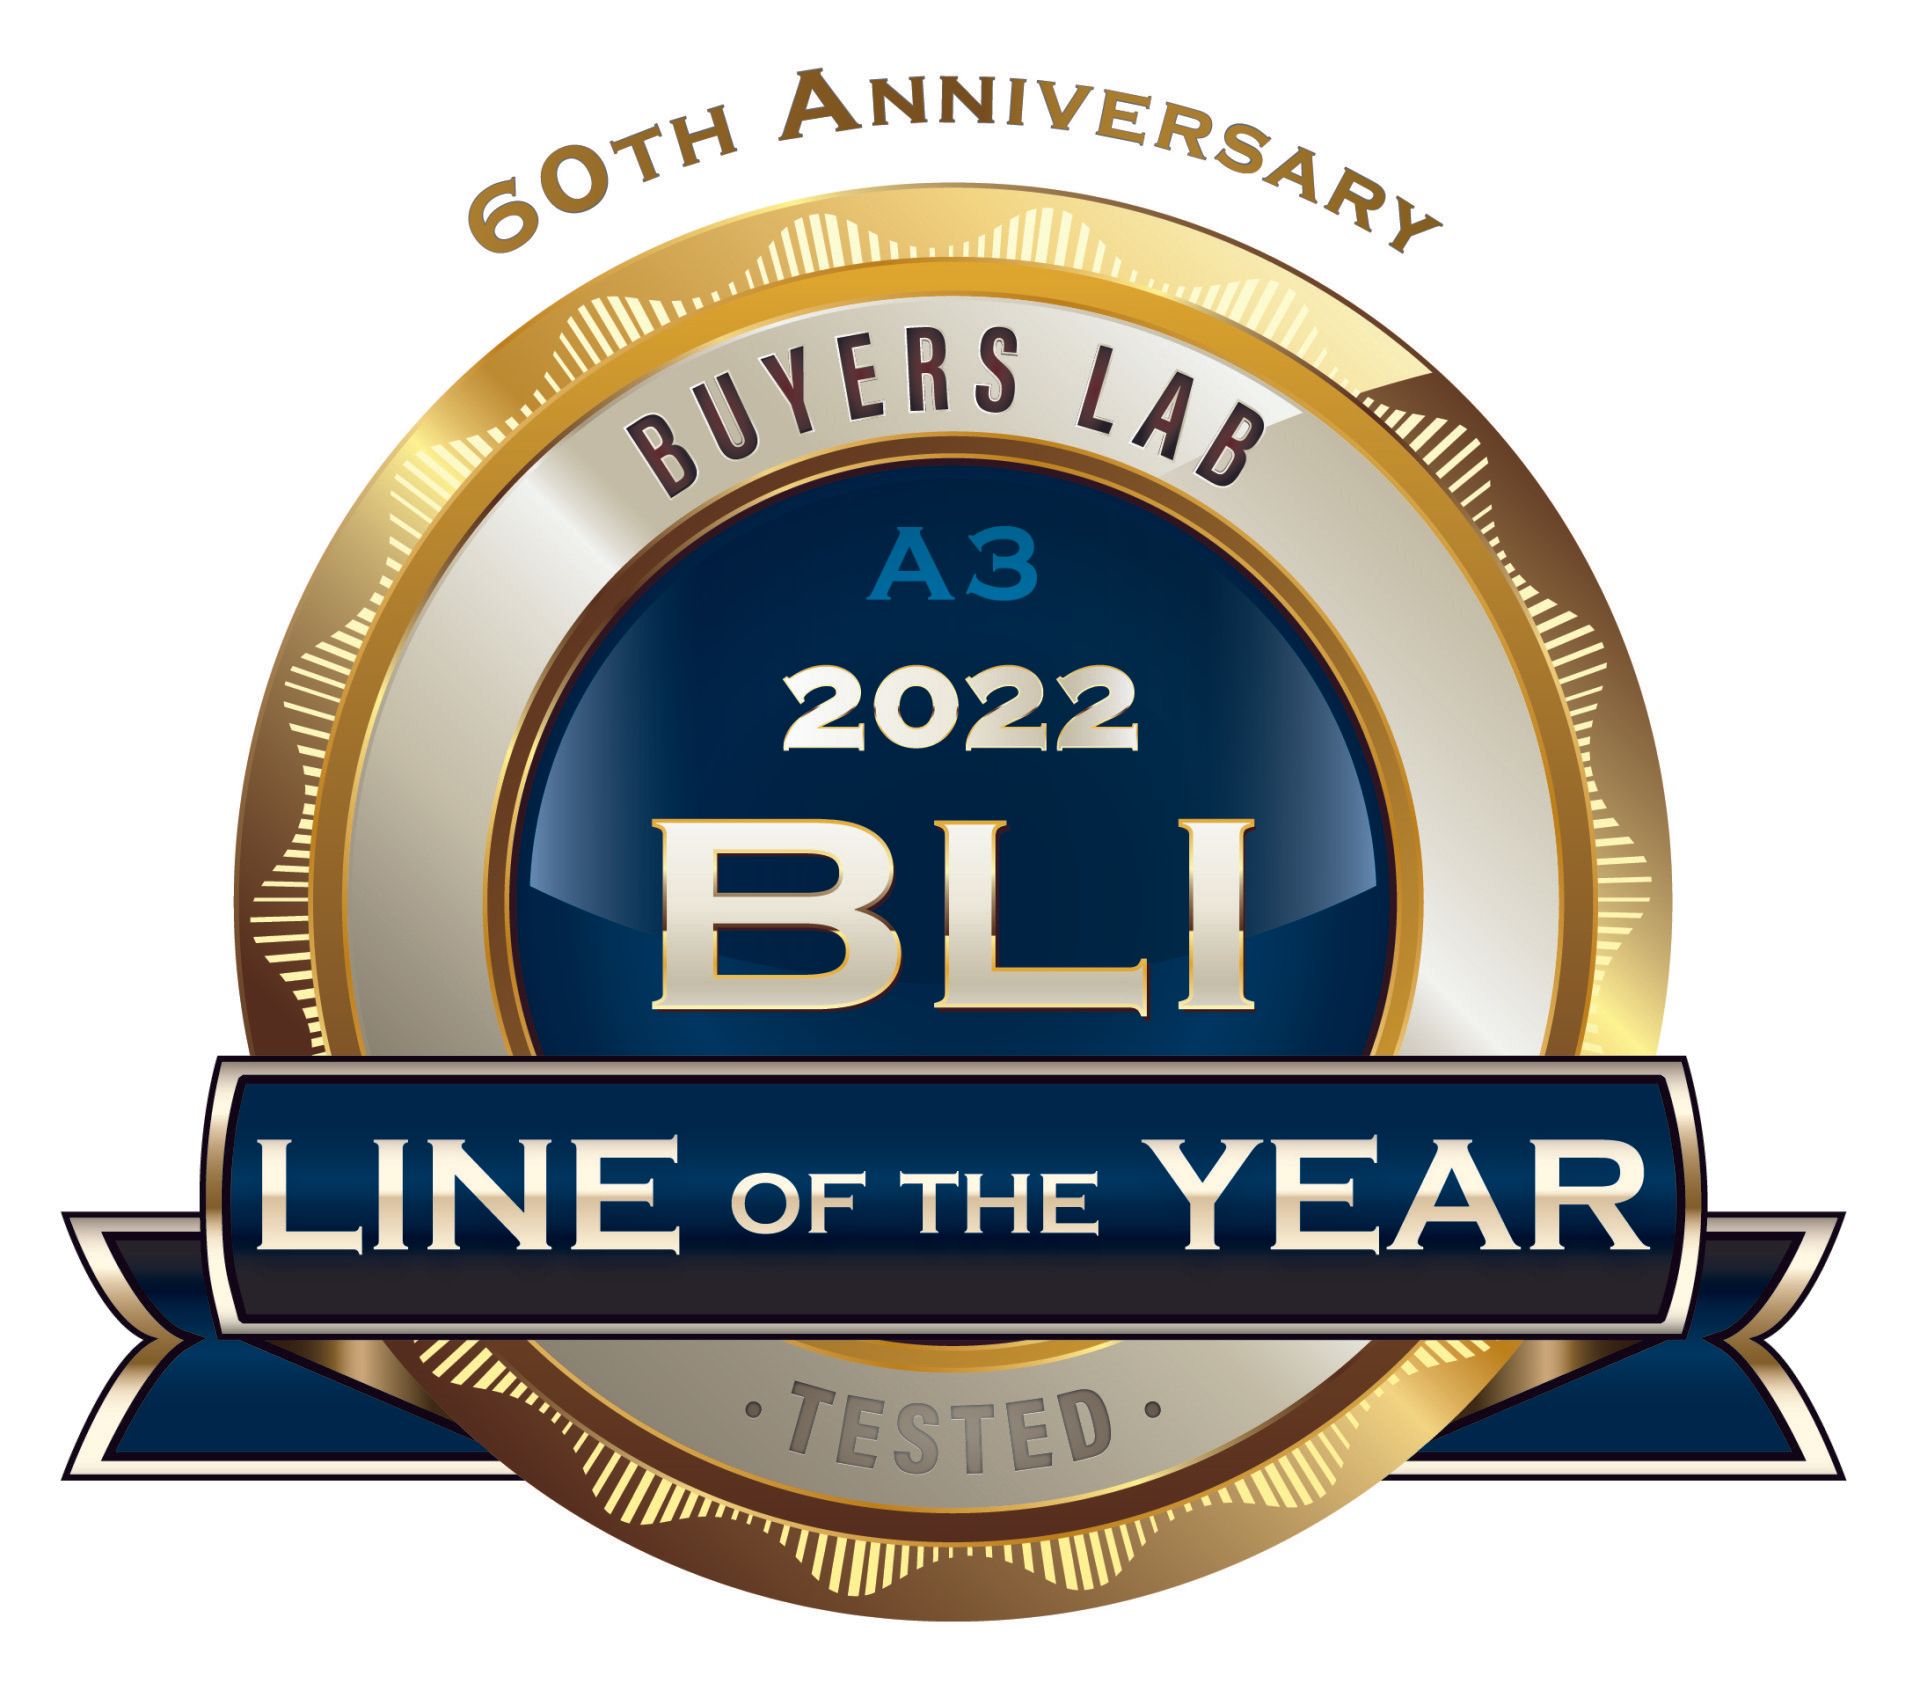 Buyers lab A3 2022 BLI Line of the Year Canon Australia